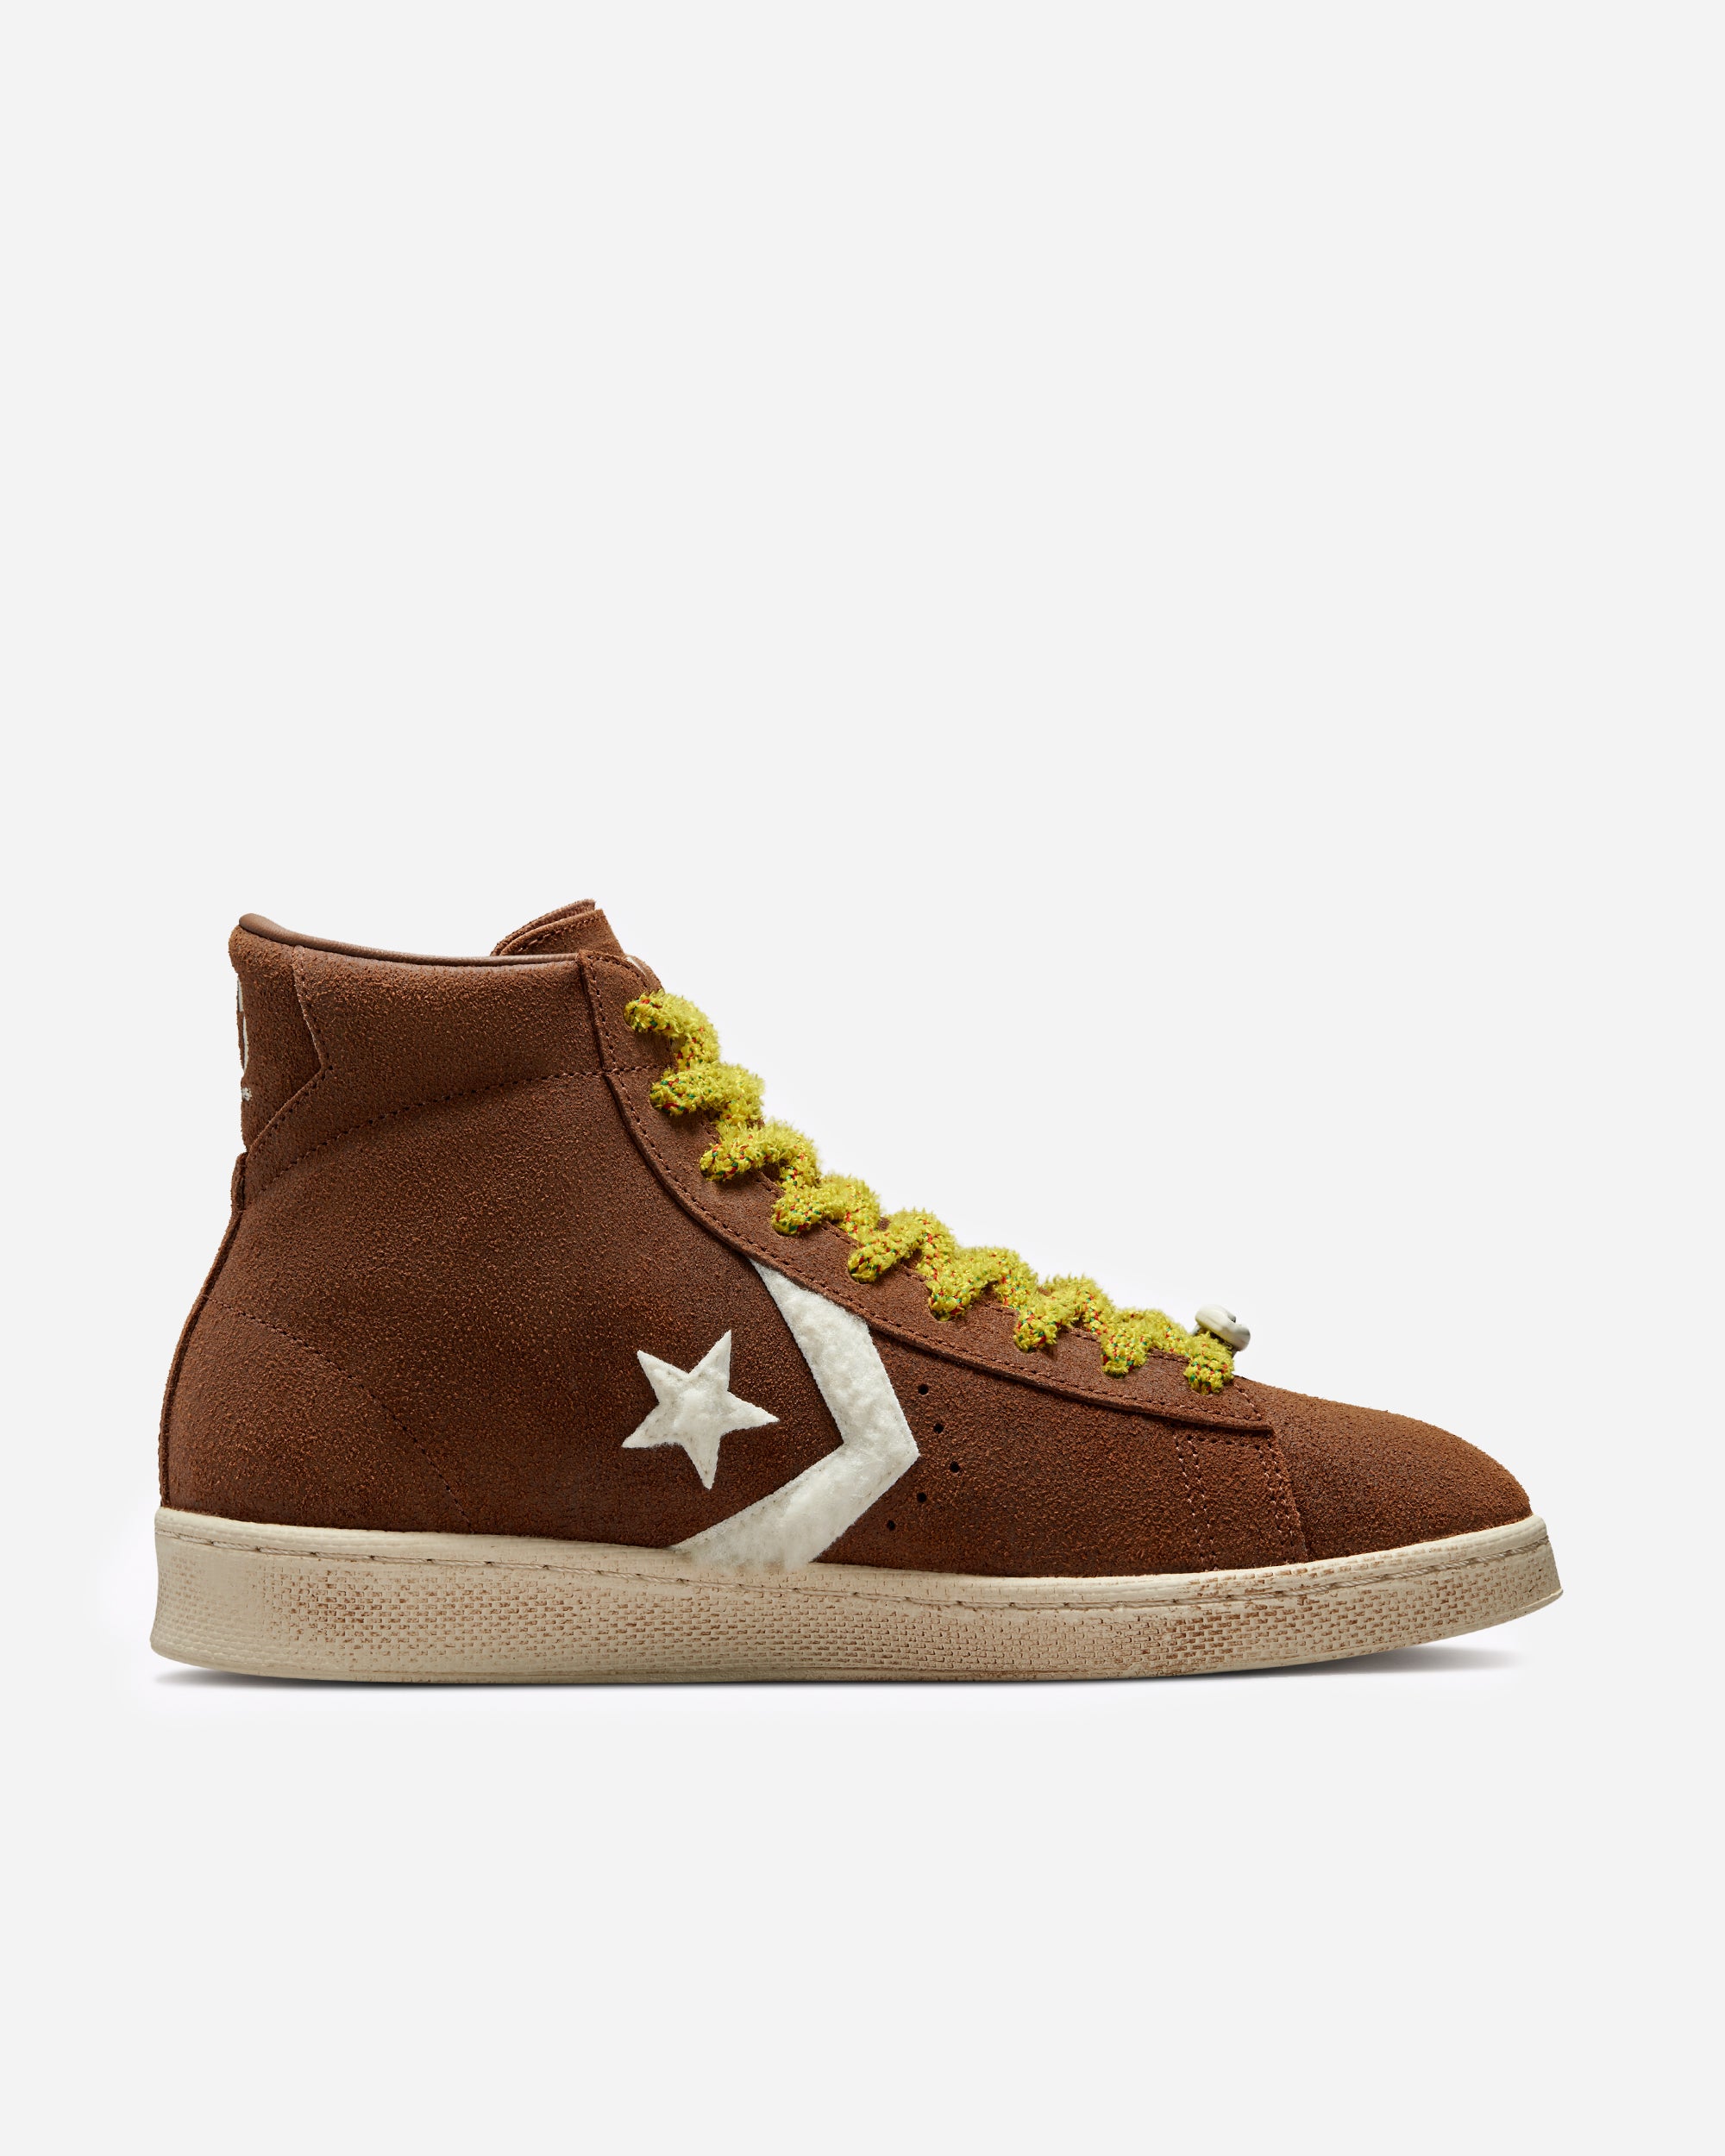 Converse x The Barriers Pro Leather Hi